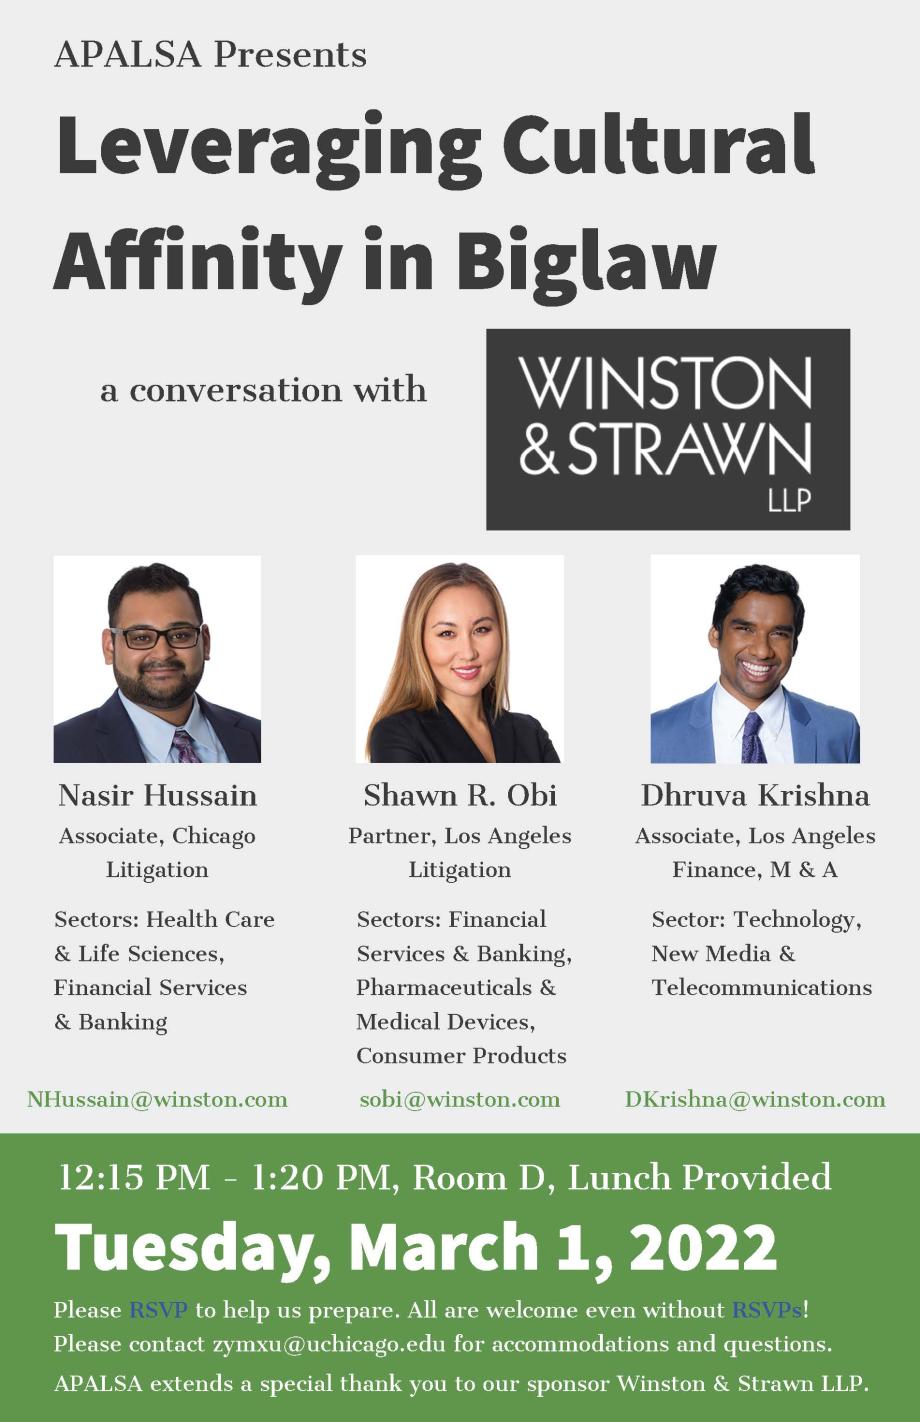 APALSA Presents Leveraging Cultural Affinity in Biglaw with Winston & Strawn LLP